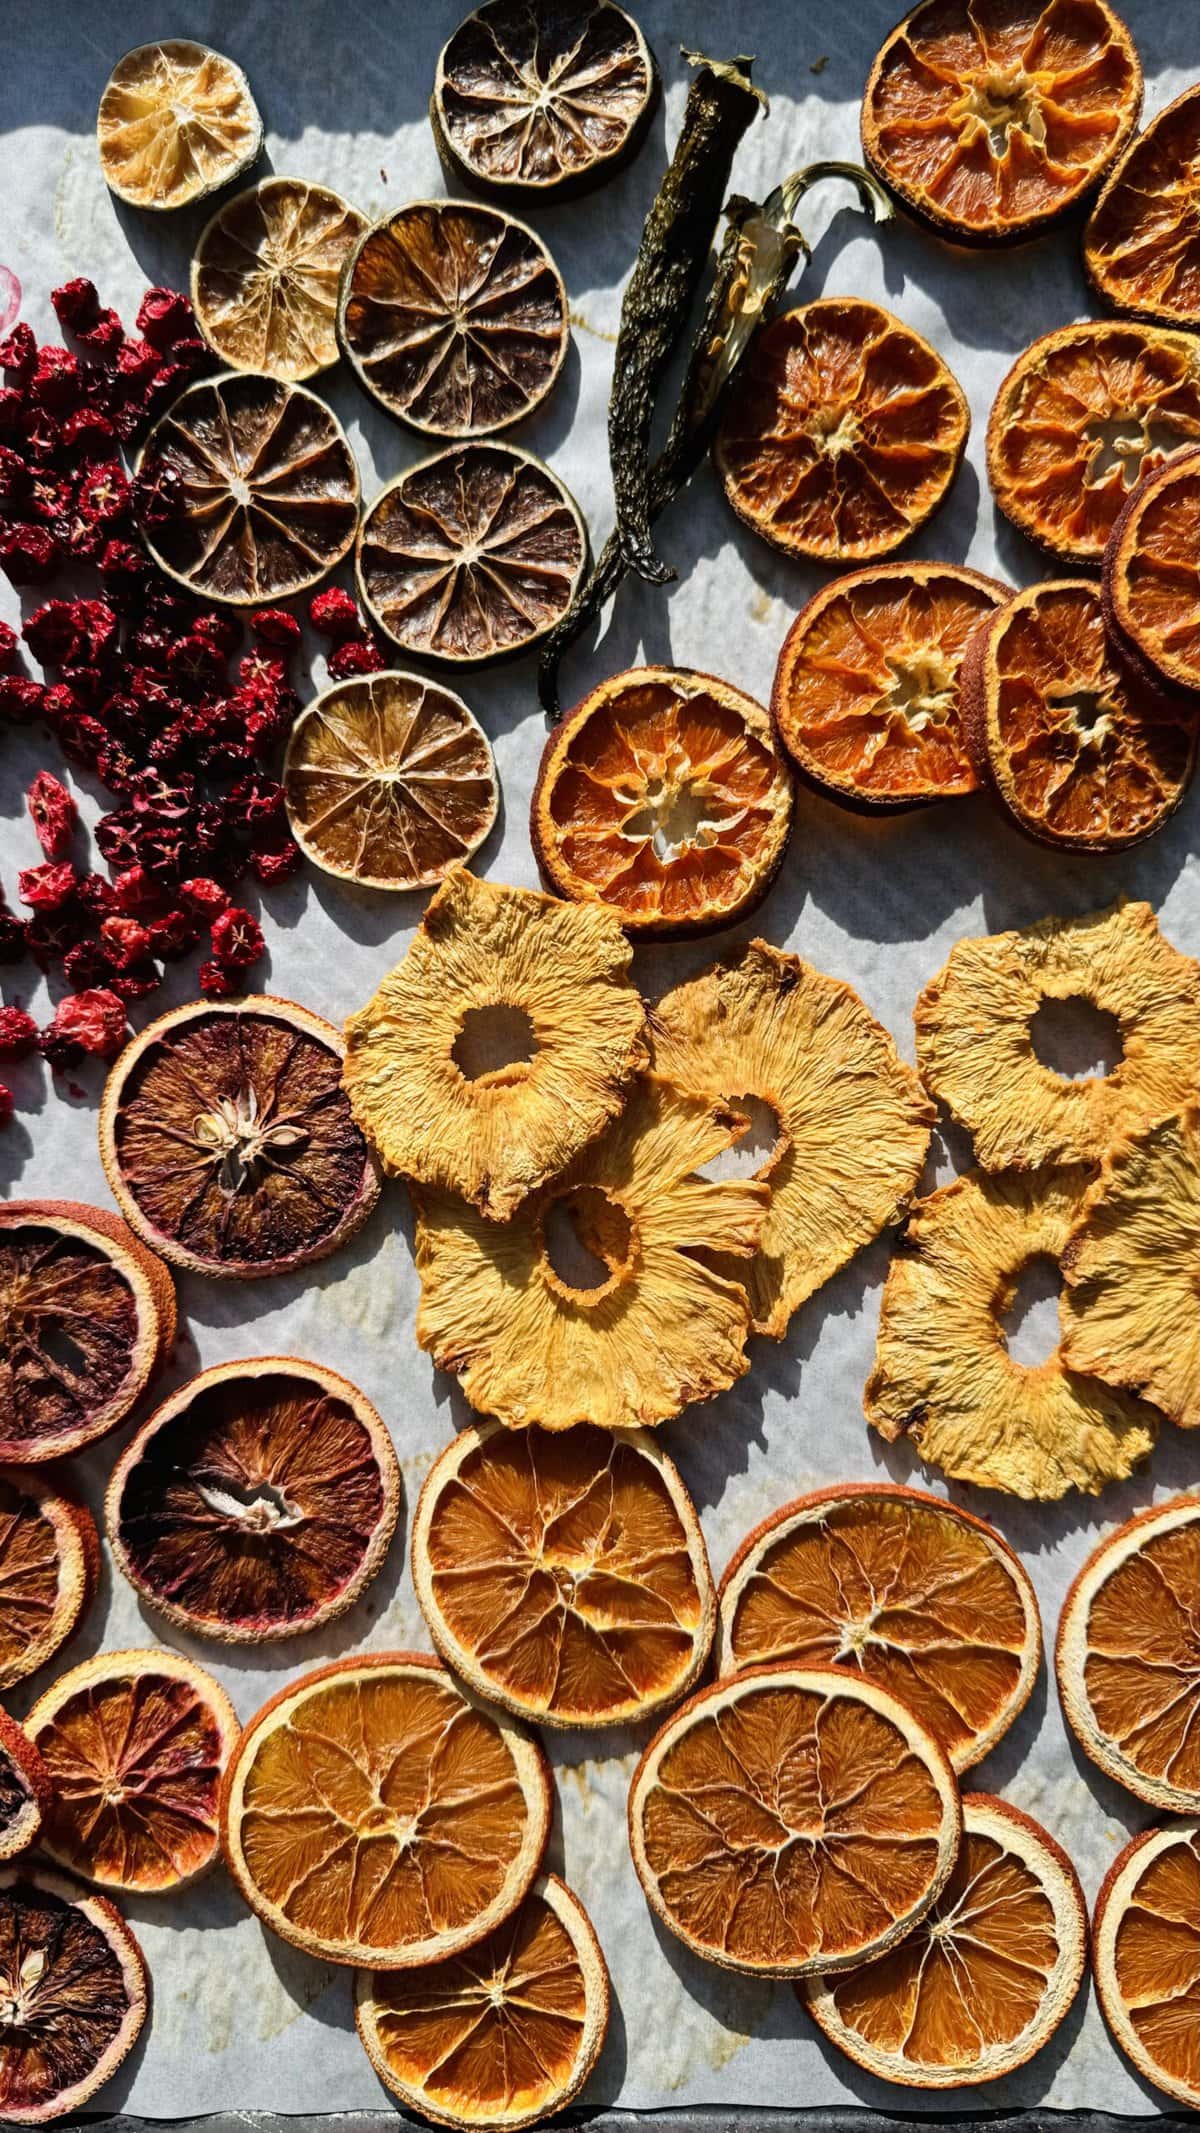 Overhead view of dried fruits on a sheet pan.